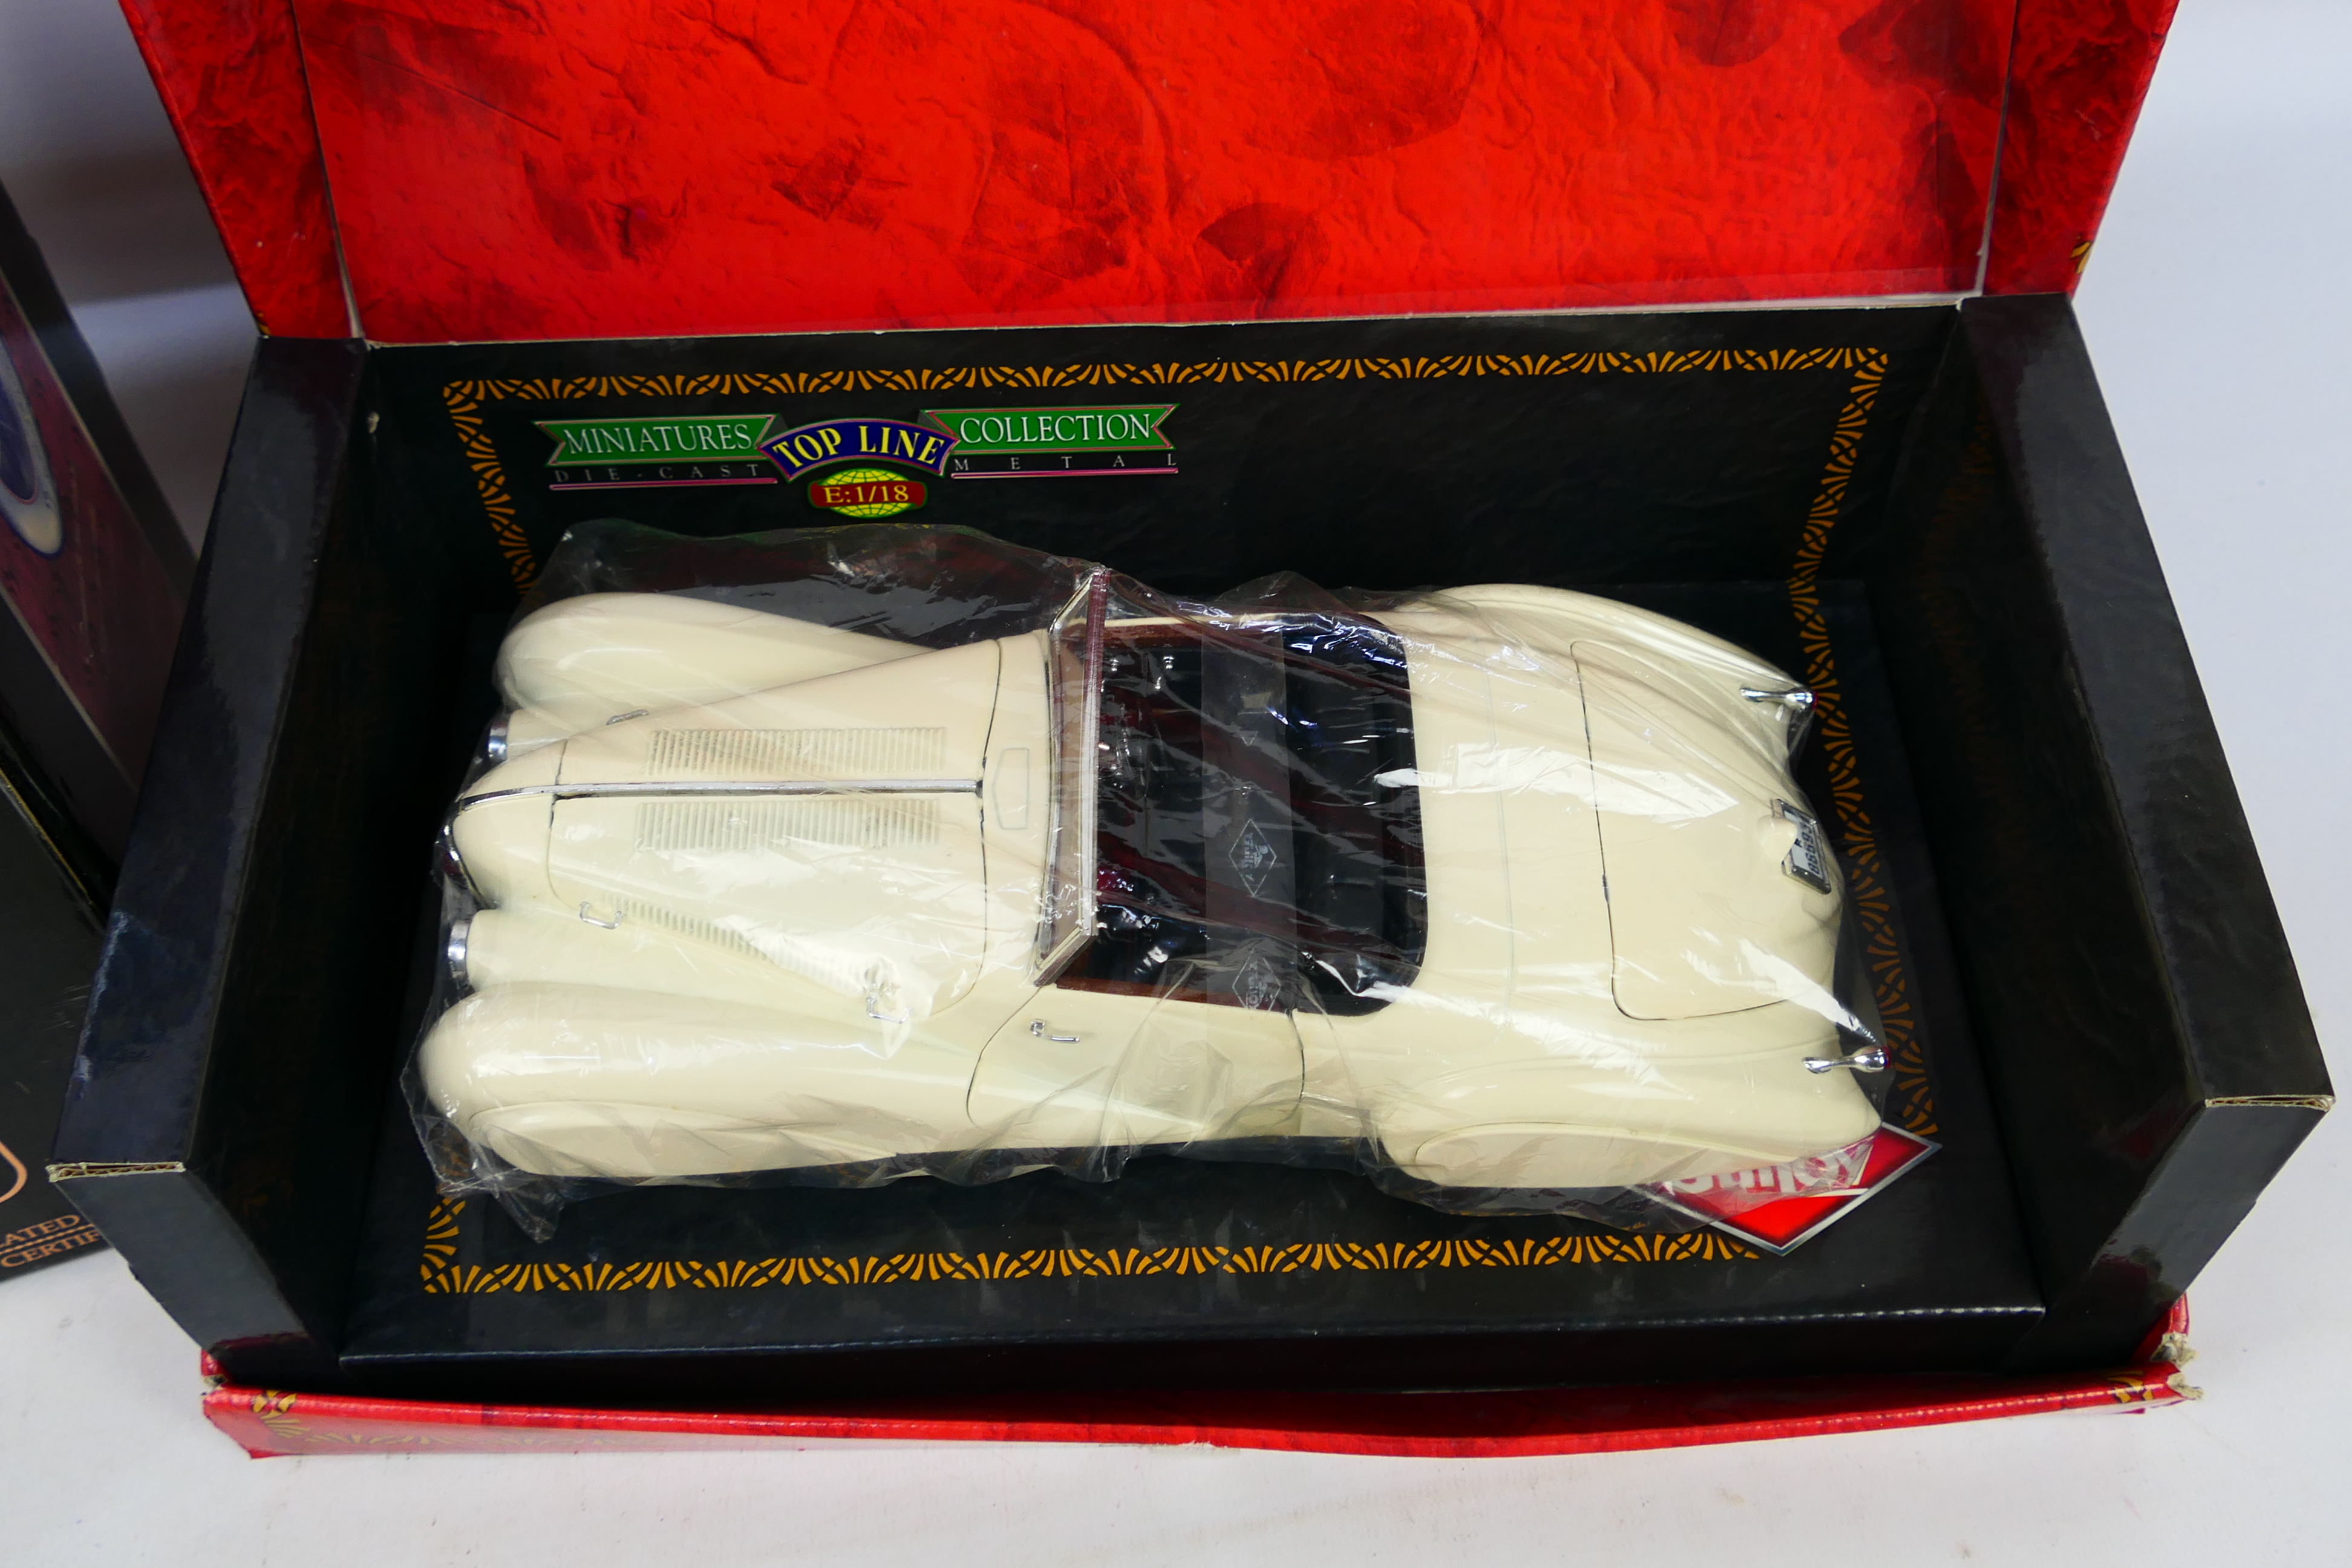 Road Signature - Guiloy - Two boxed 1:18 scale diecast model cars. - Image 7 of 7